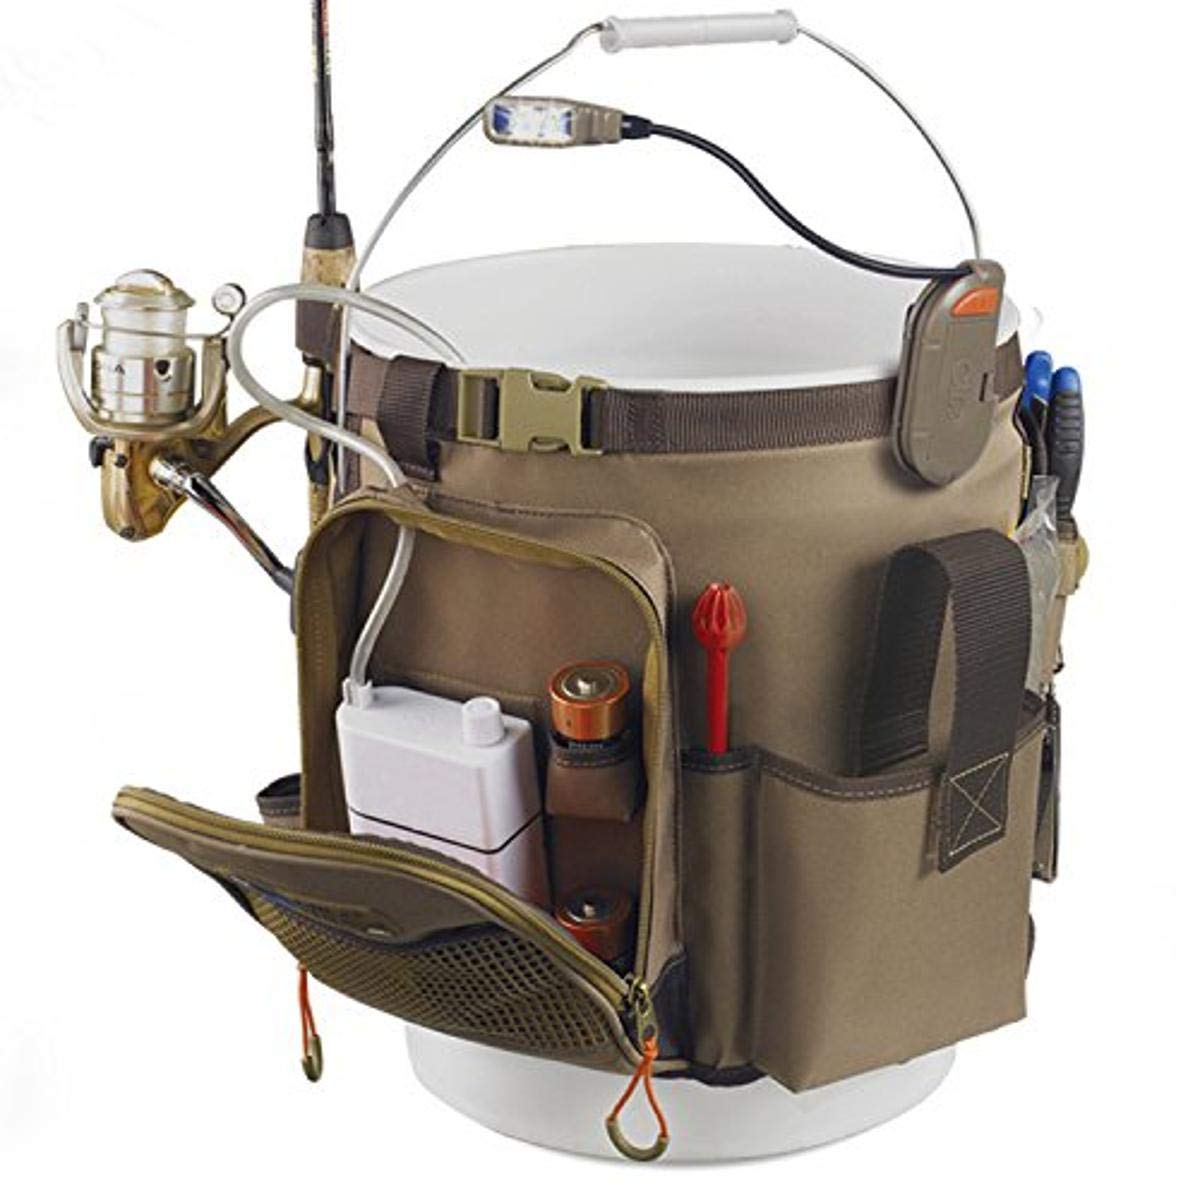 "Best Tackle Rigger Lighted Bucket Organizer: Ultimate Fishing Gear Storage Solution"